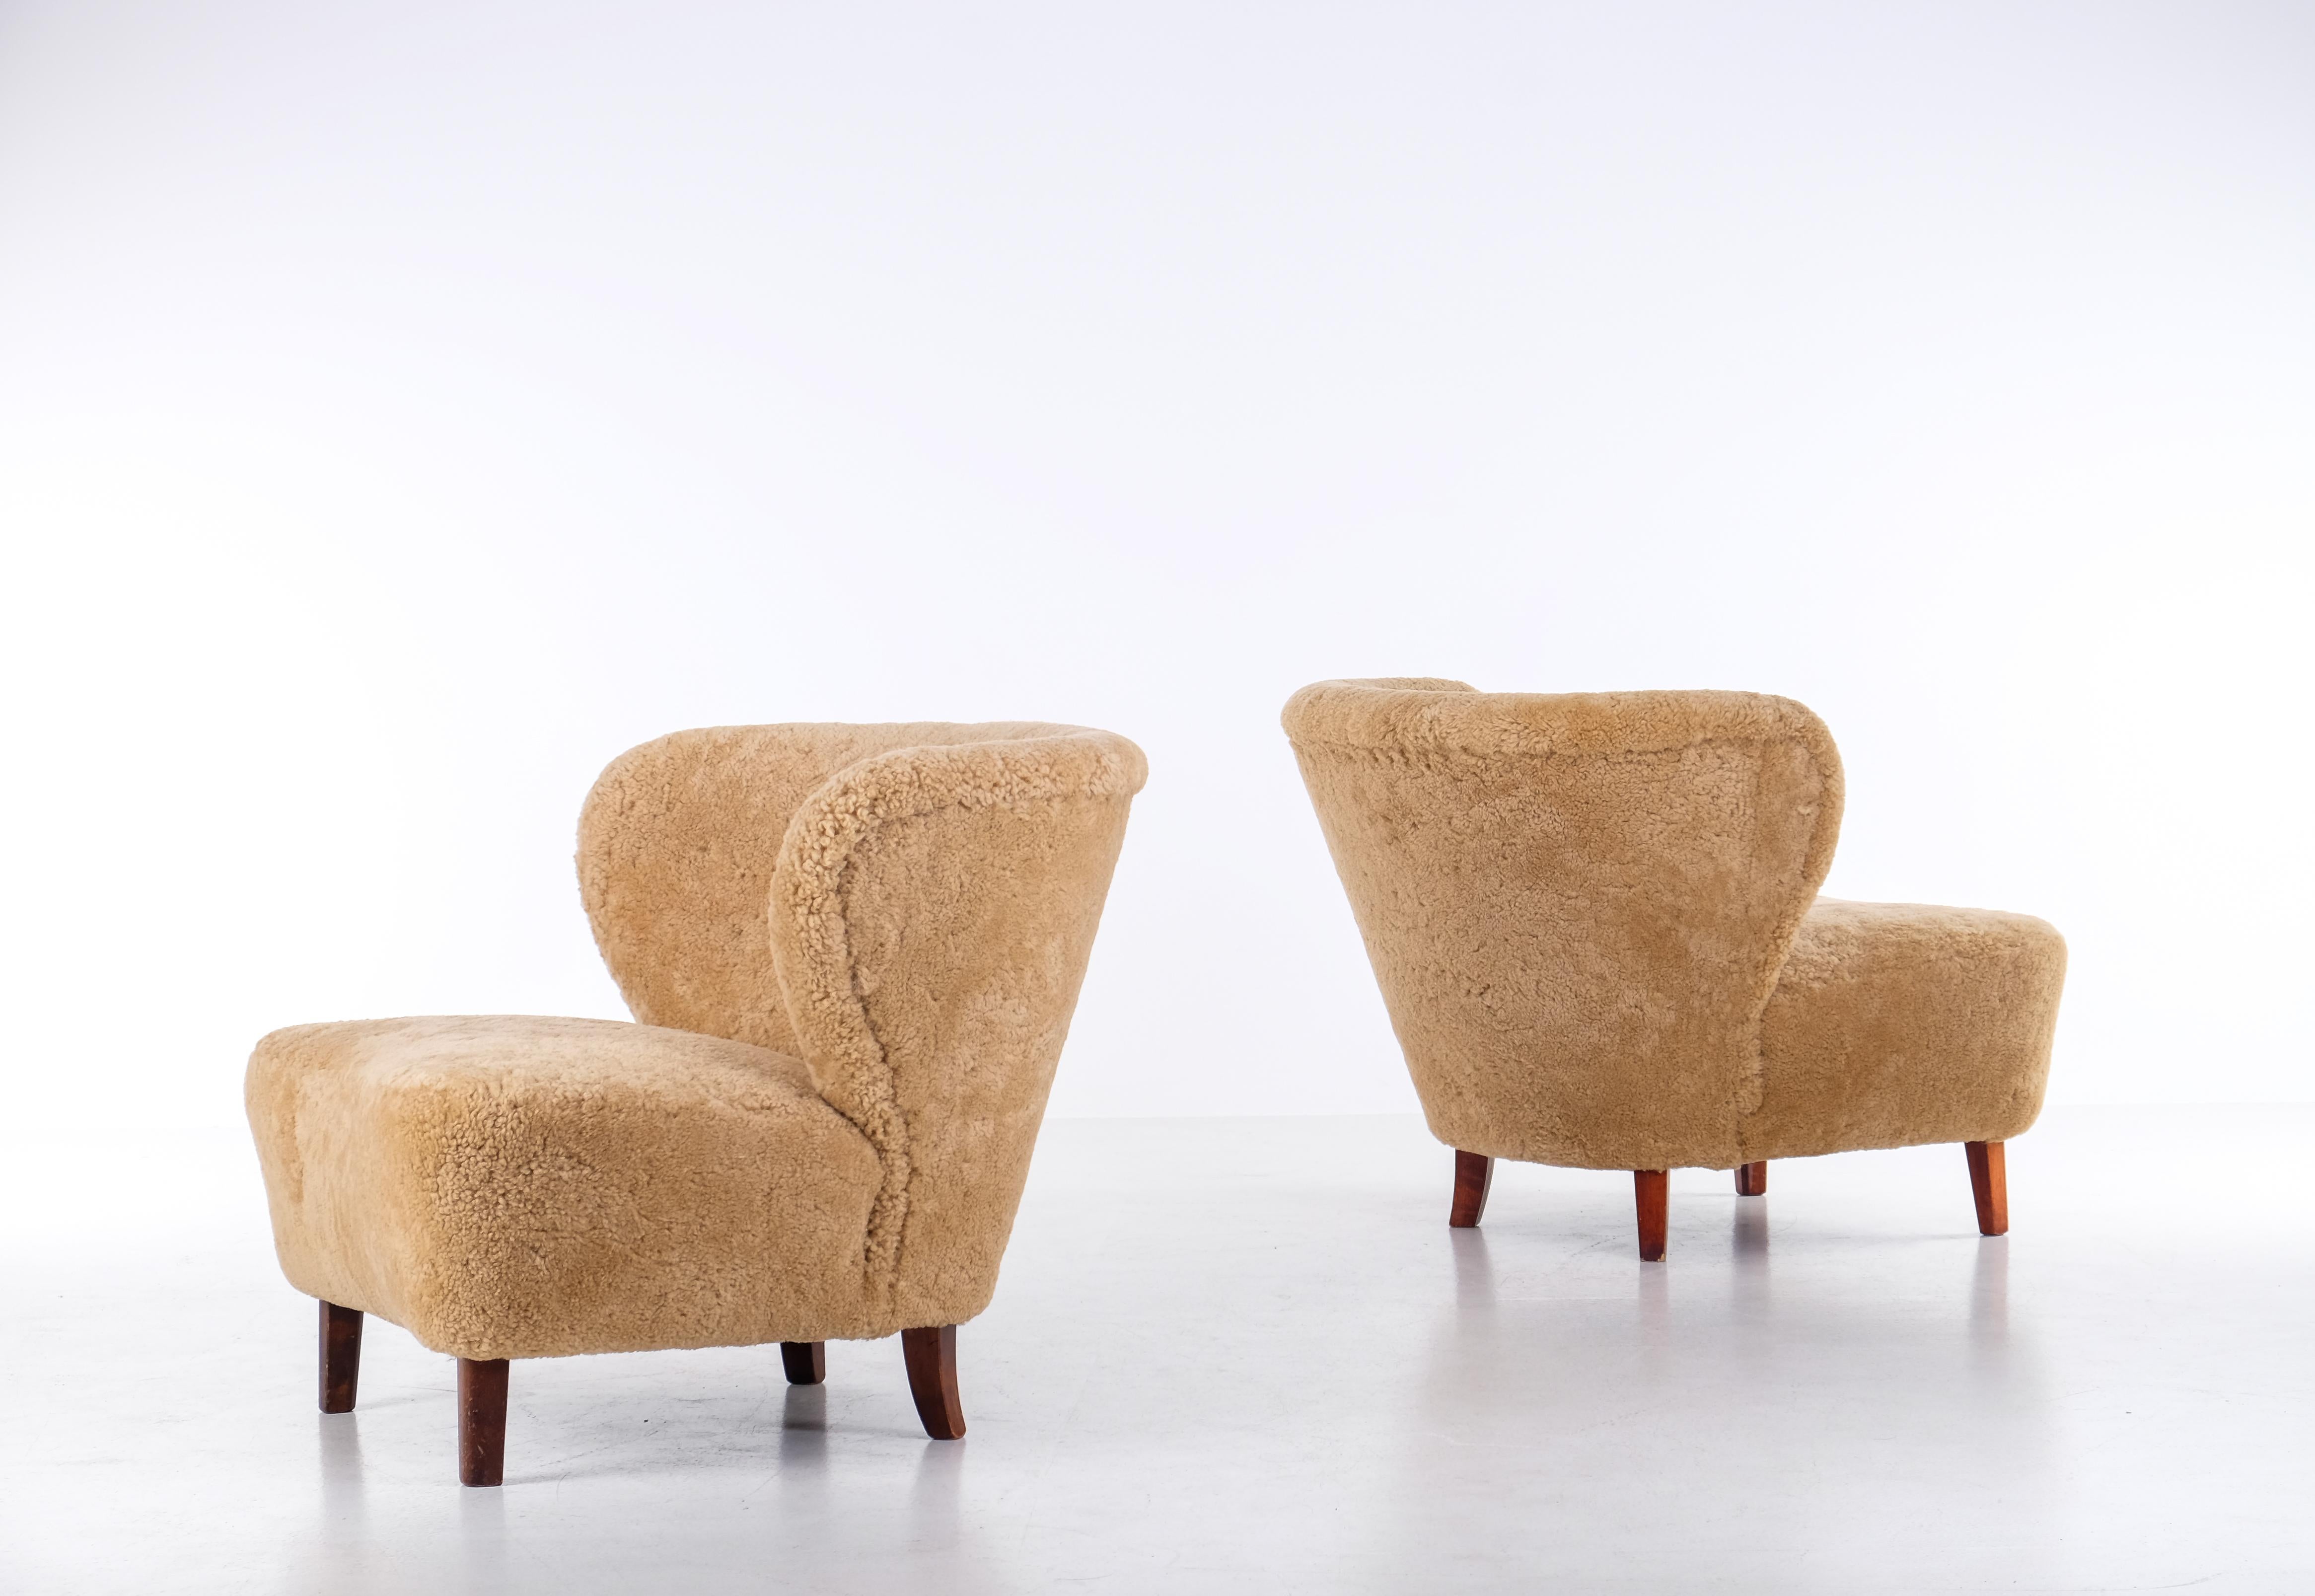 Pair of Easy Chairs by AB Erik Ek's Snickerifabrik, Malmö, Sweden, 1940s In Good Condition For Sale In Stockholm, SE